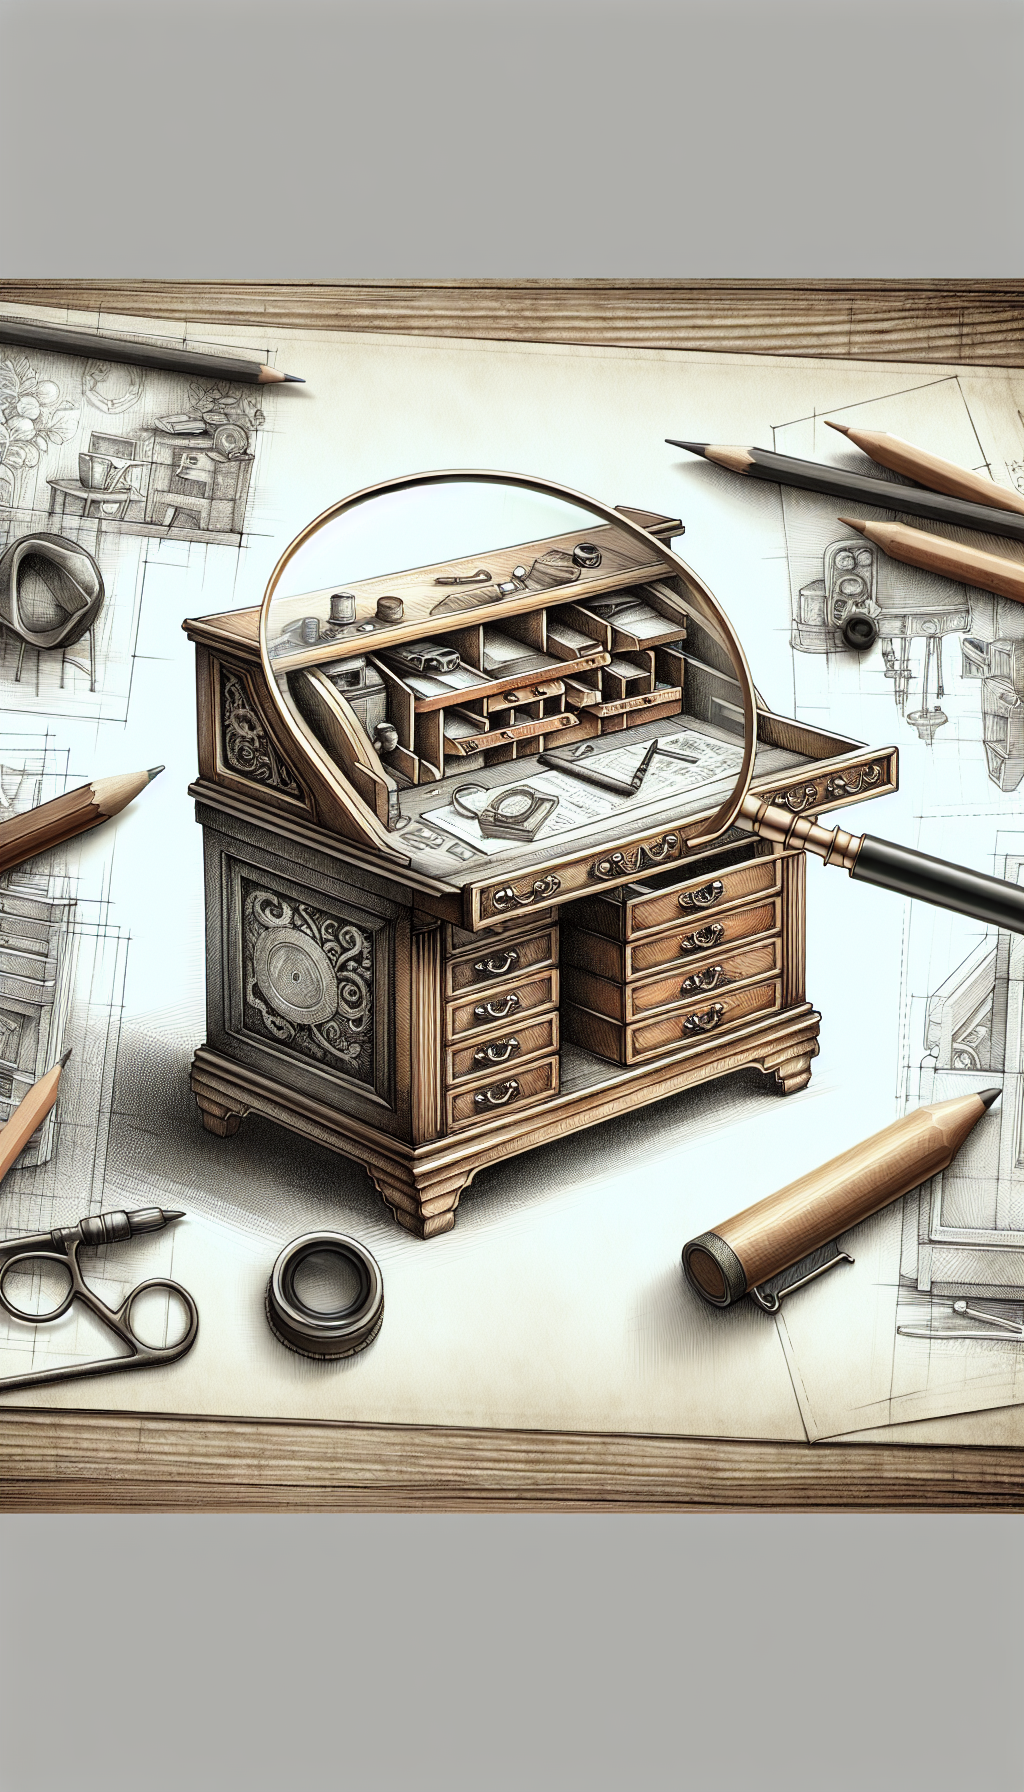 An illustration depicts a magnifying glass hovering over a richly detailed roll-top desk, revealing hidden compartments typical of true antiques. Inside one compartment, there's a tag with a historically accurate date and craftsman signature, symbolizing authenticity. The desk is partly sketched in pencil, partly painted in watercolor, and partly rendered in crisp digital lines, accentuating the fusion of past and present values.